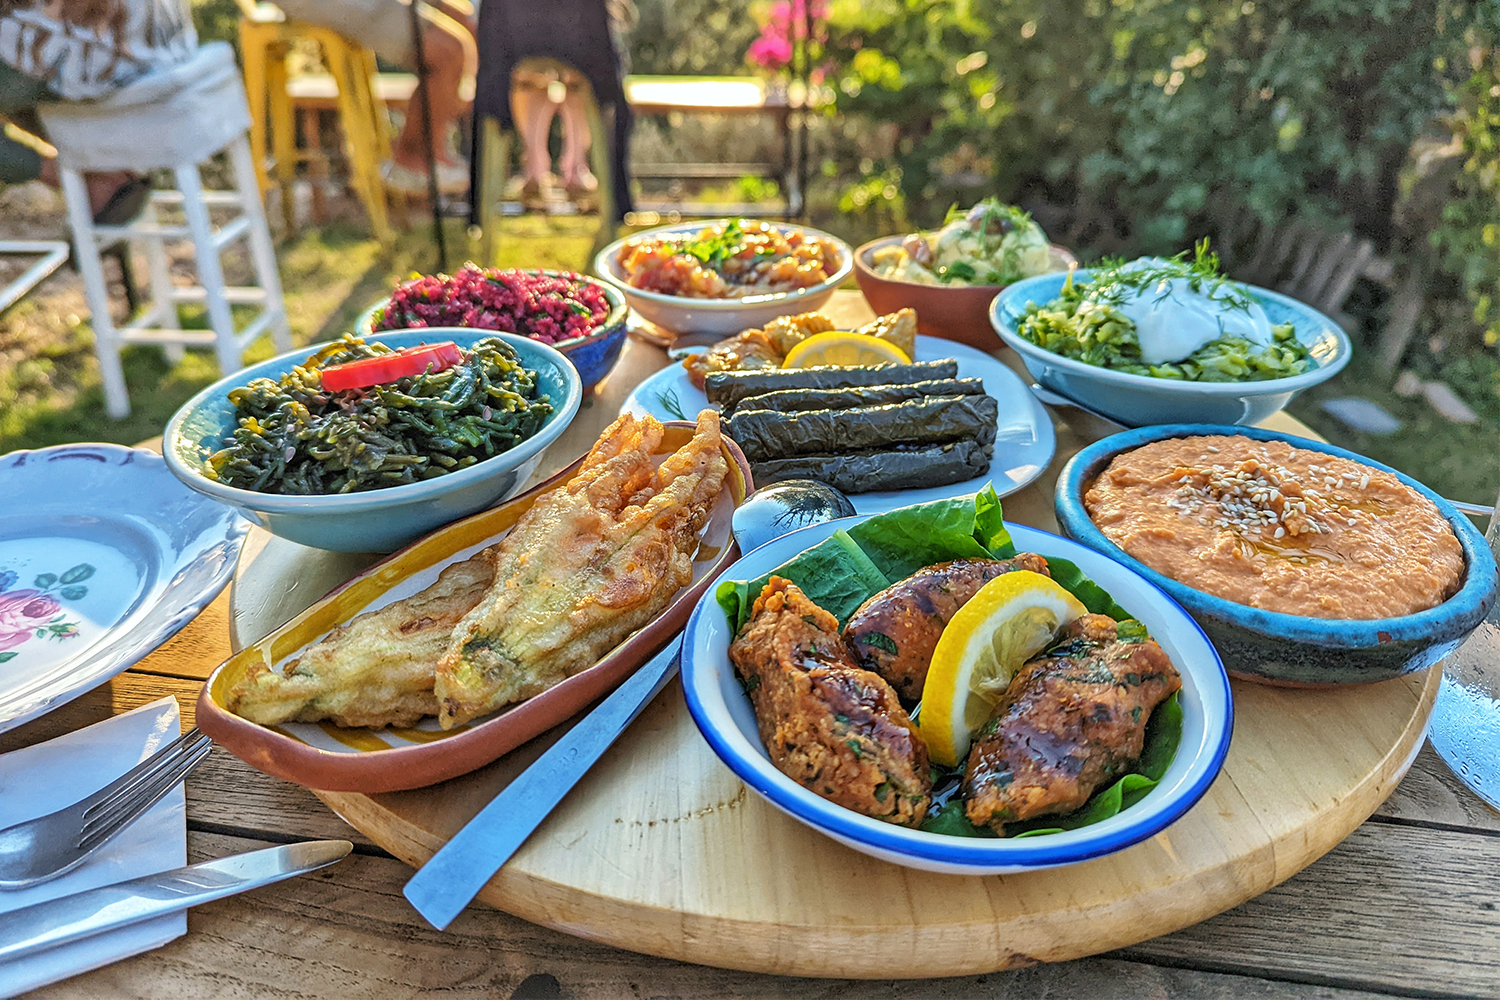 A spread of food on a recent two-week trip to Turkey